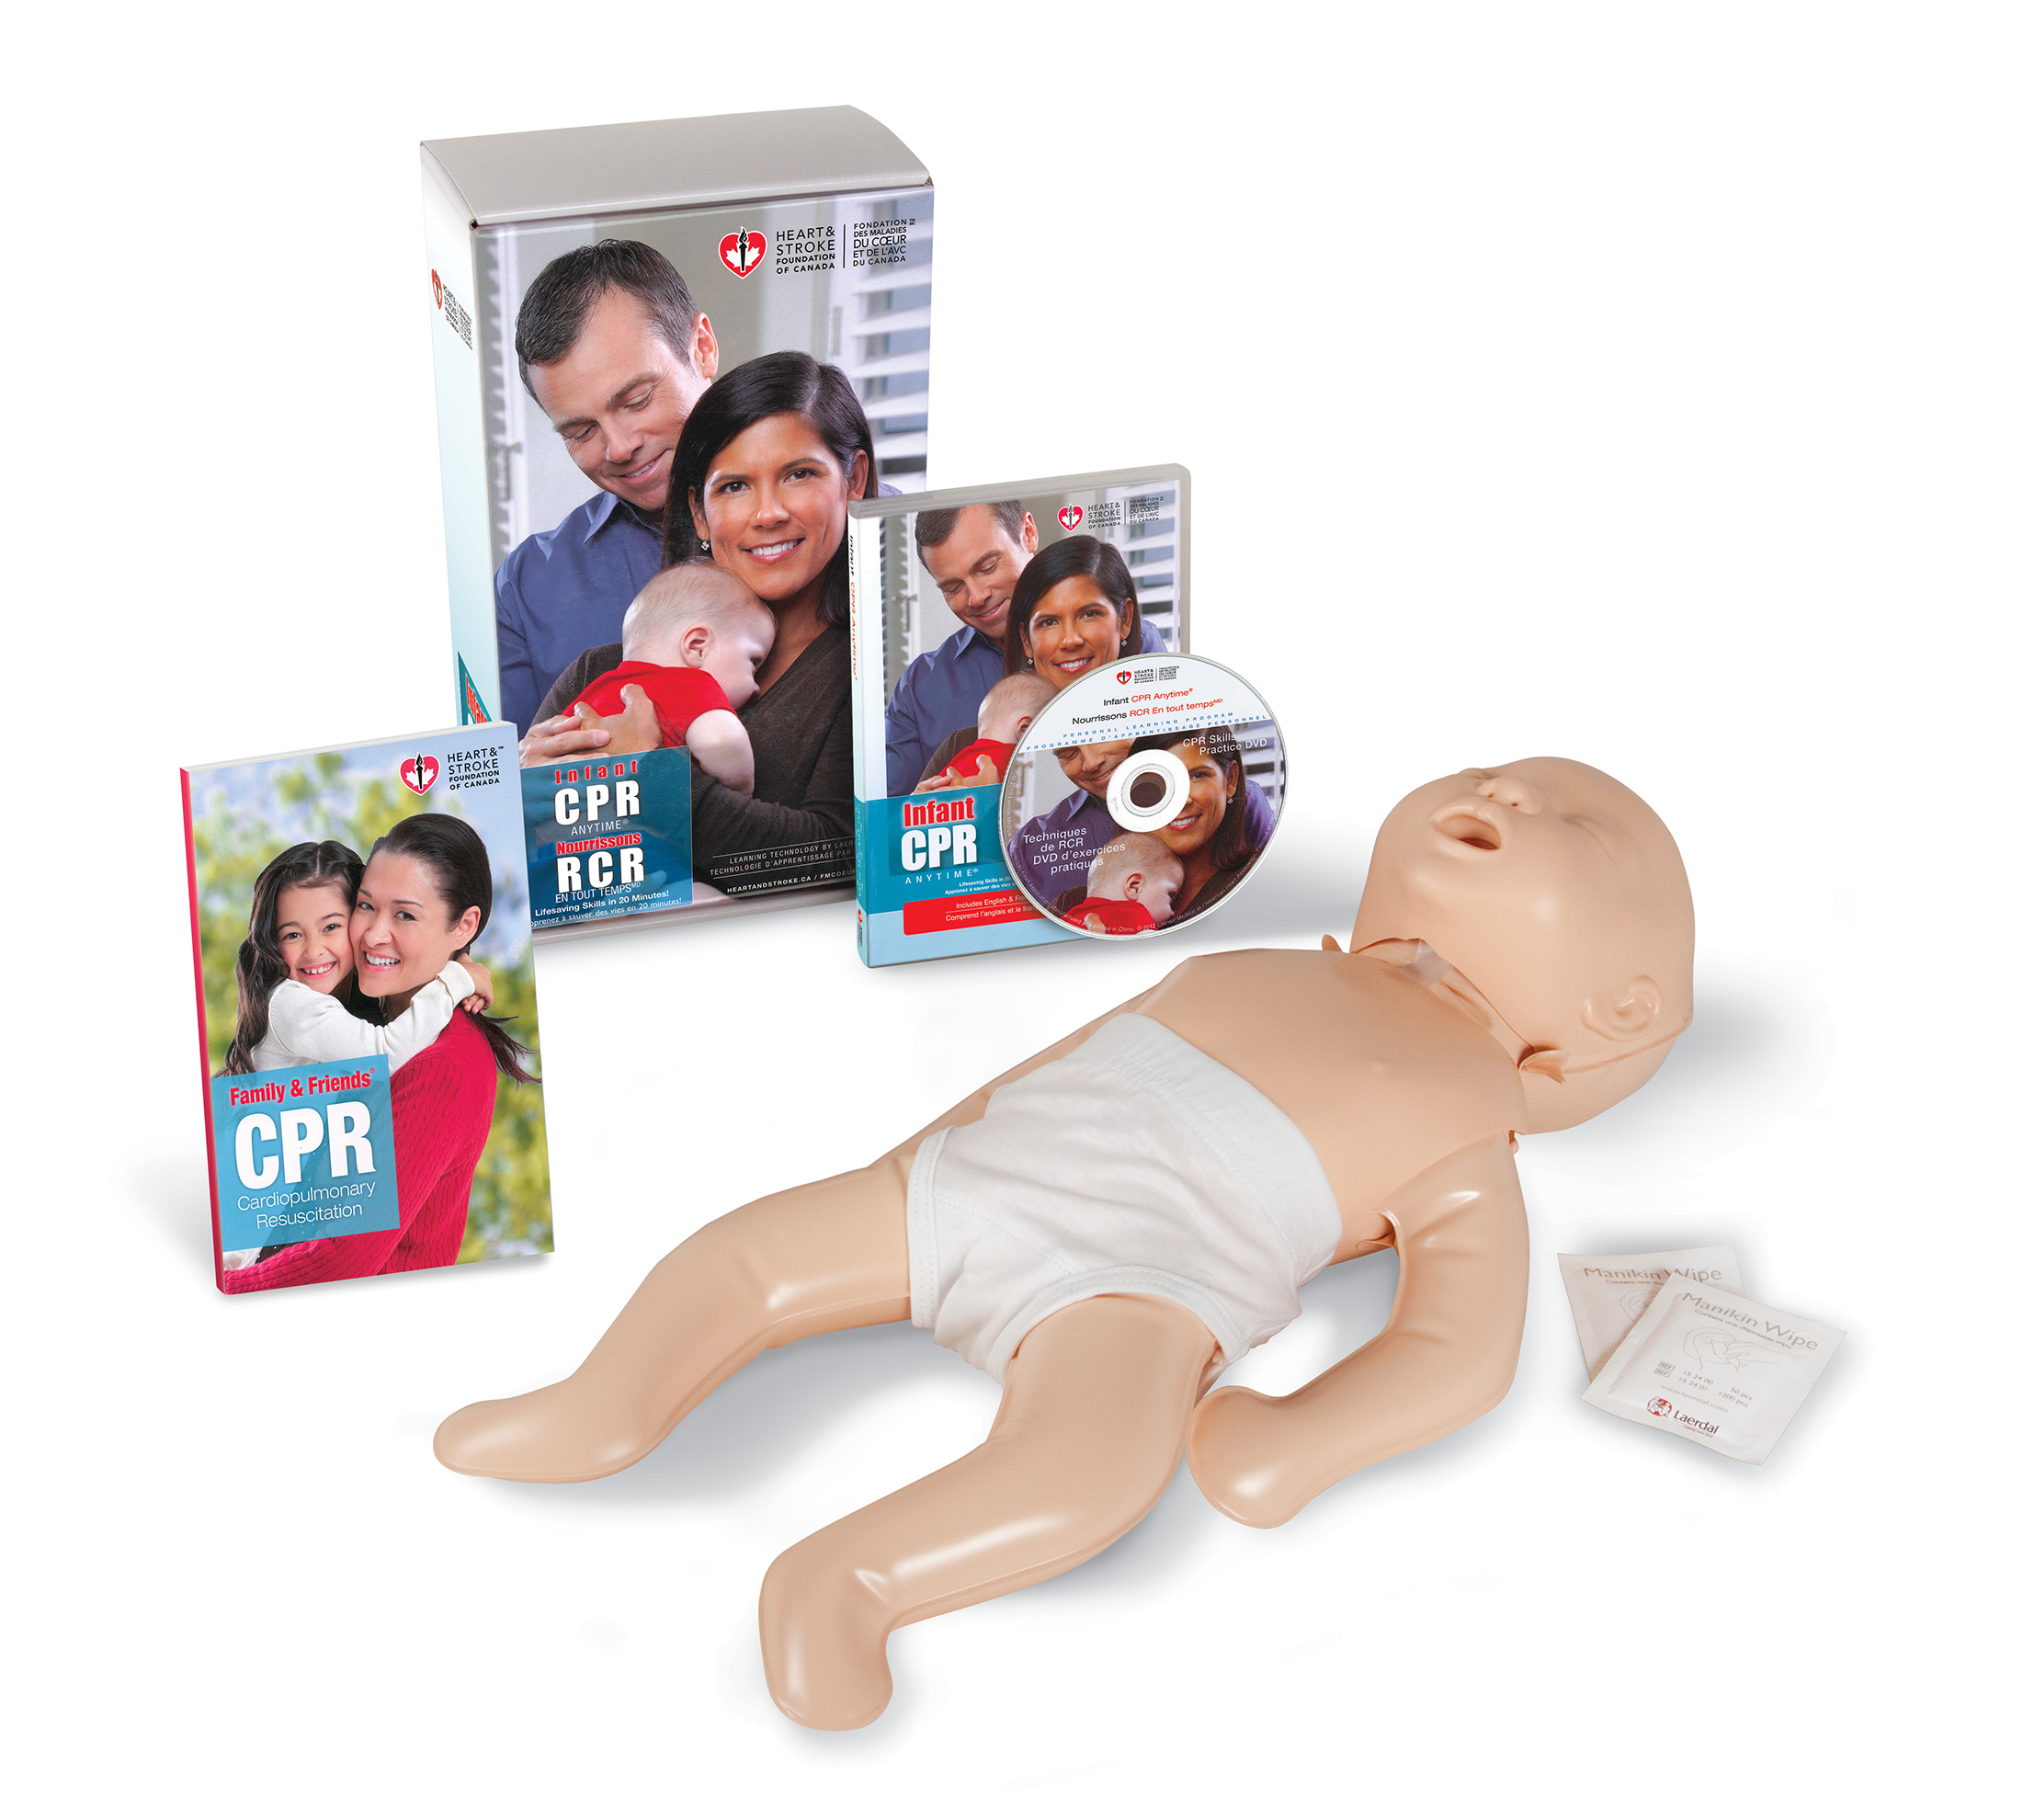 St Mark James CPR and AED Courses in Kelowna, British ...